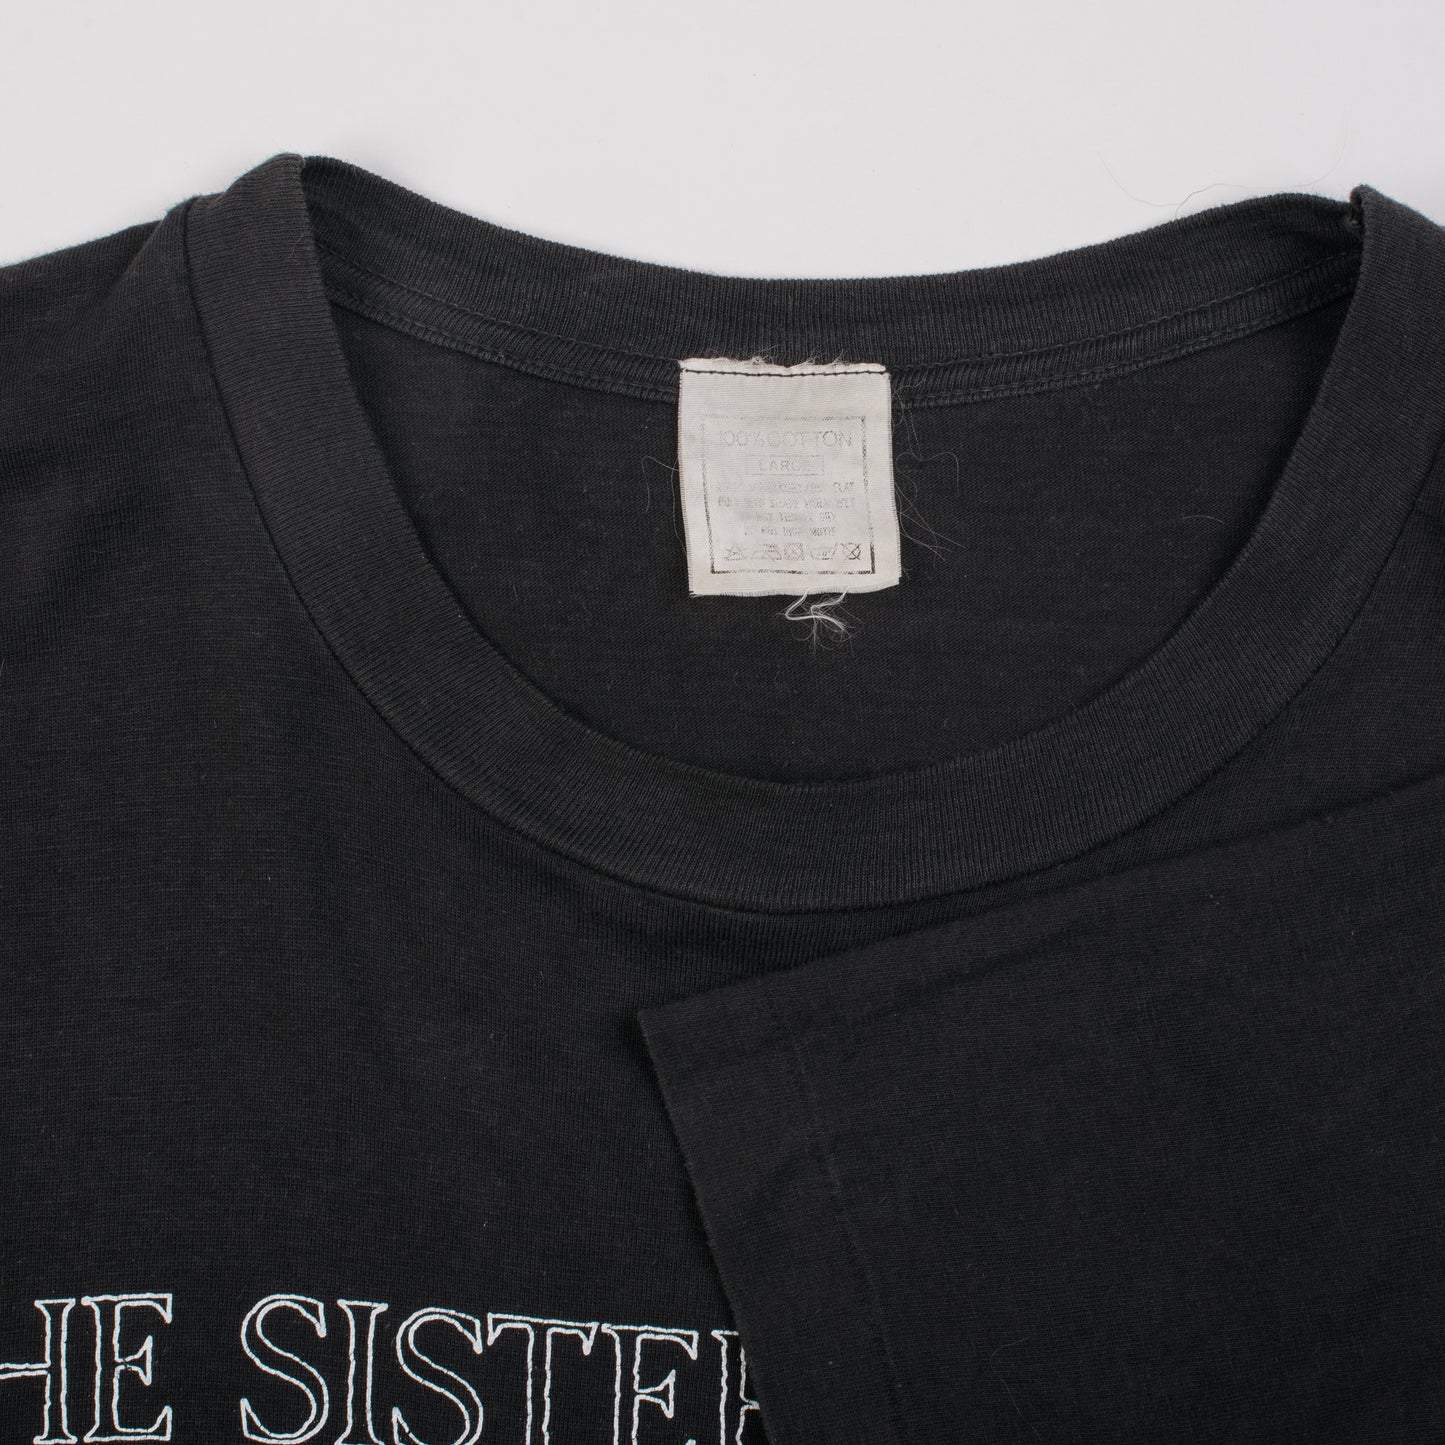 Vintage 1991 The Sisters Of Mercy Reading Fest T-Shirt